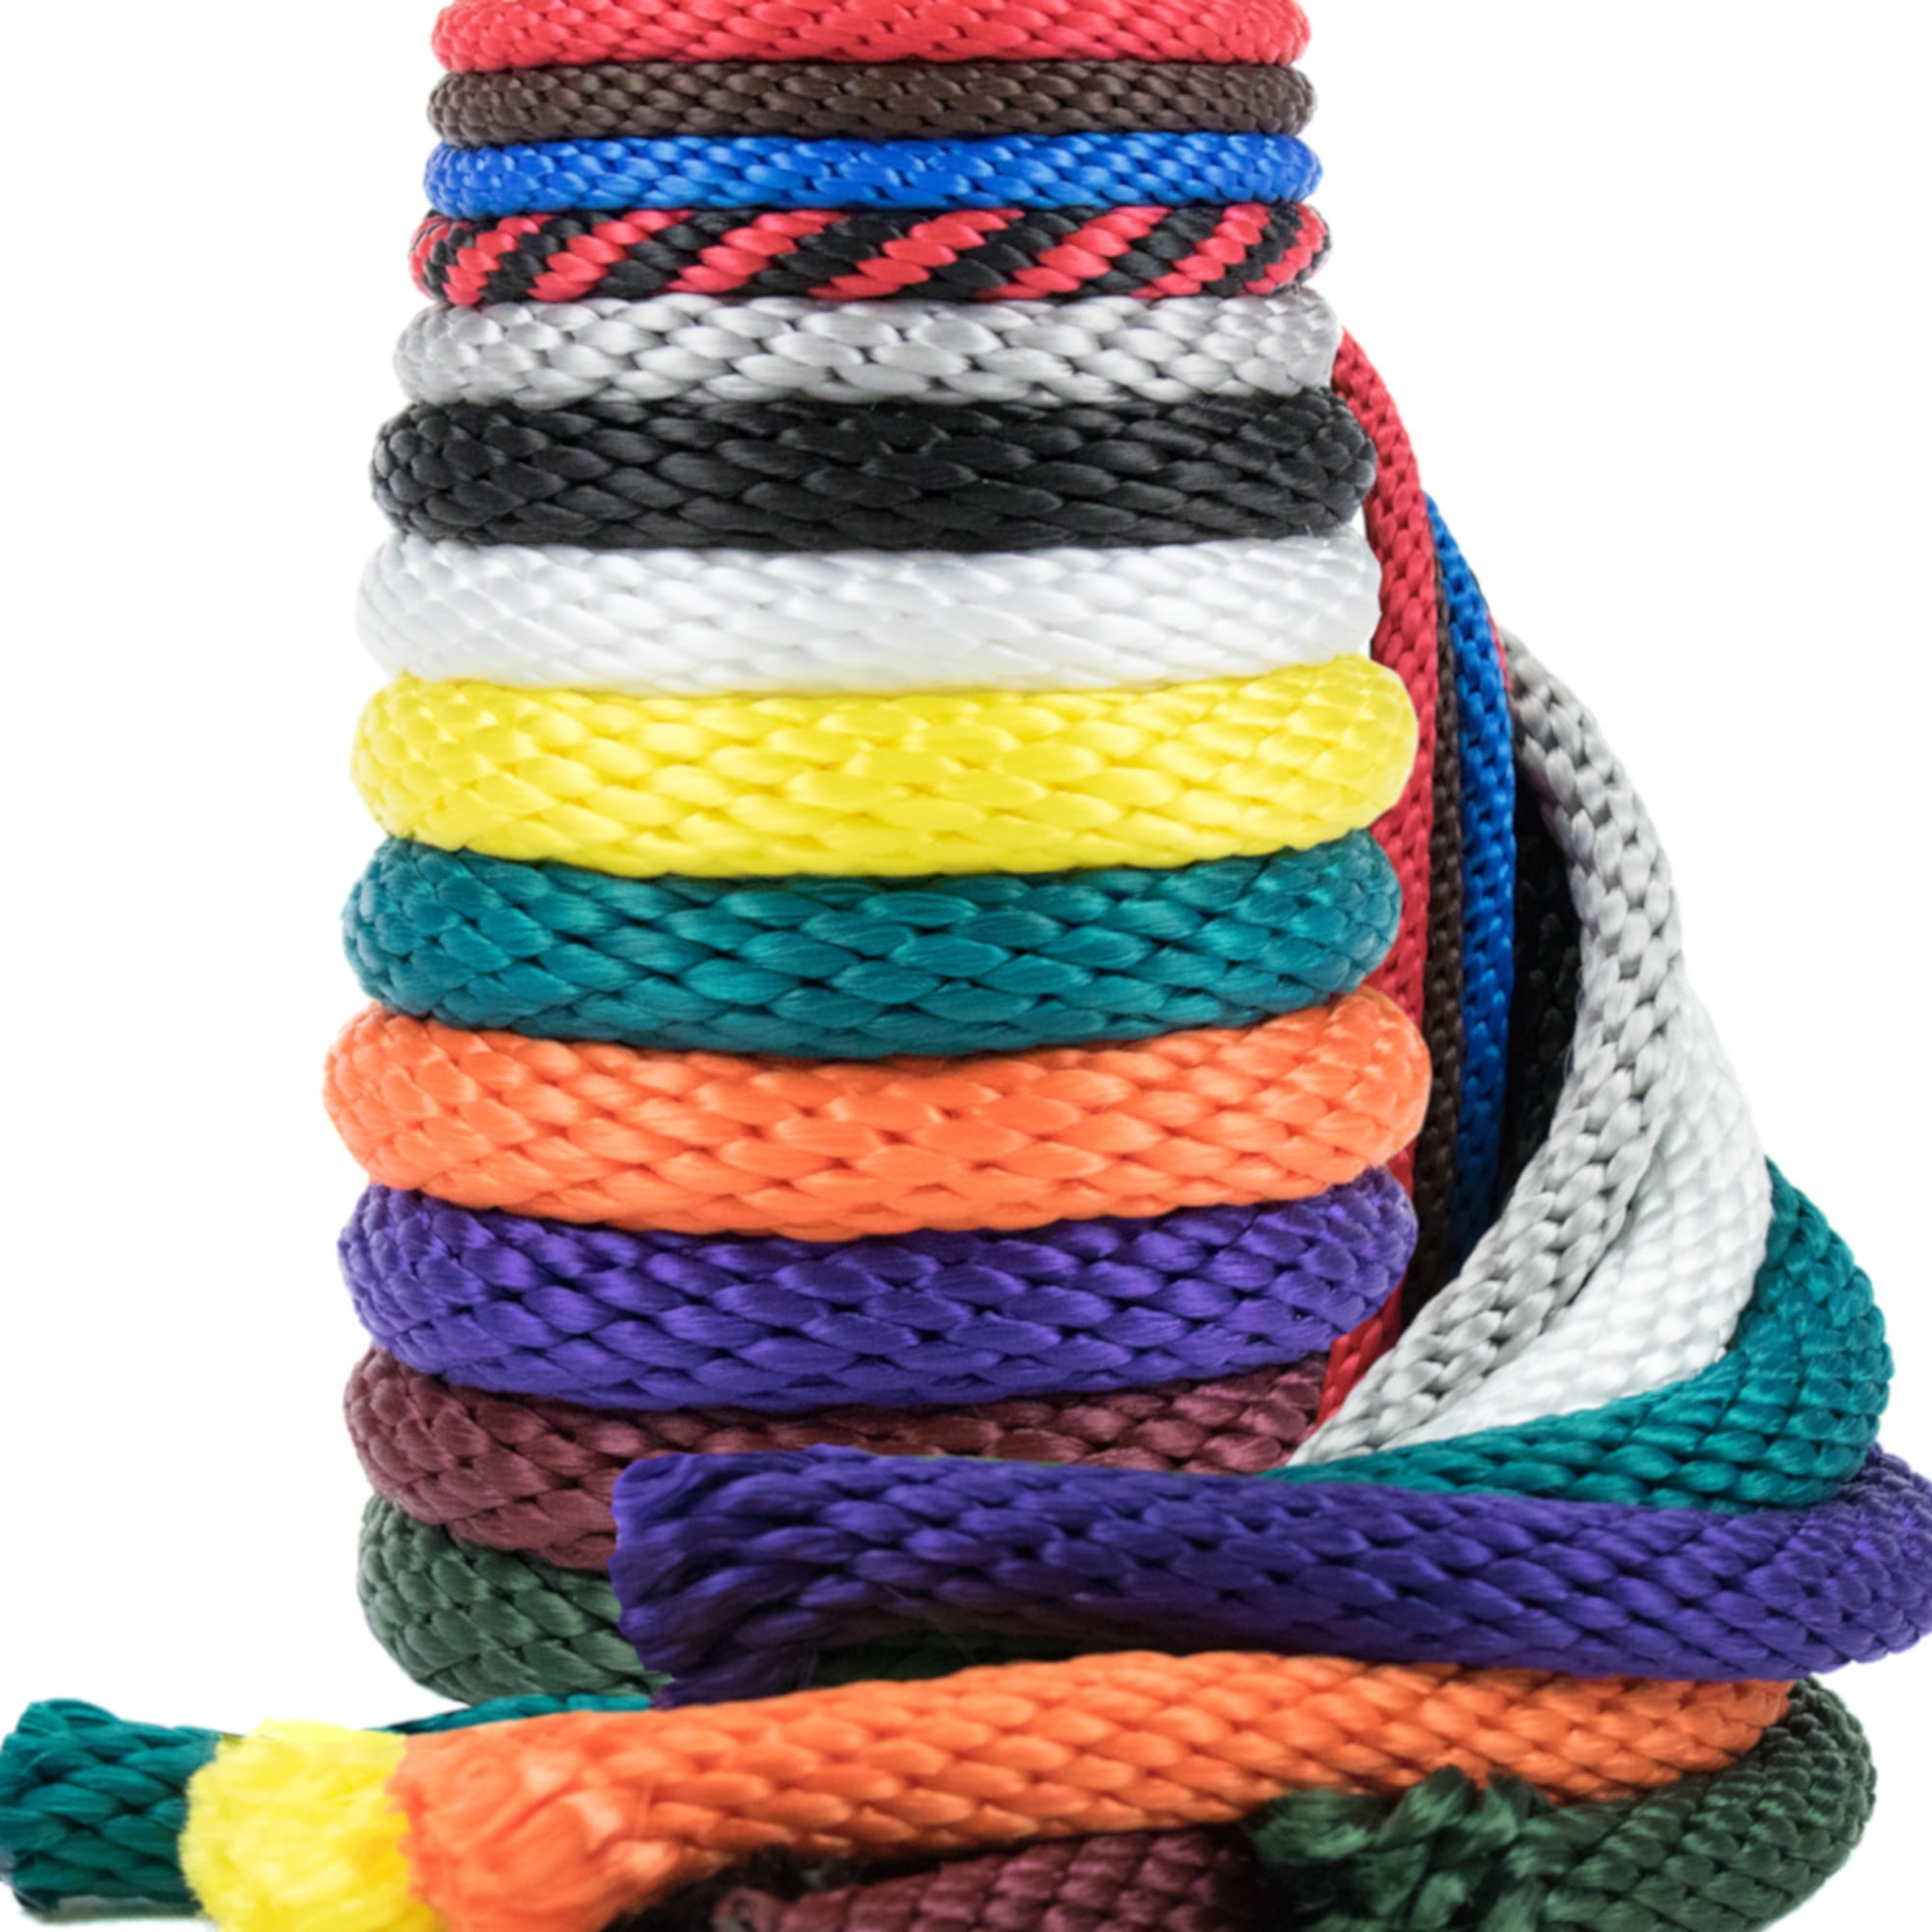 Ravenox Solid Braid Utility Rope Pets & Décor Sports All Purpose Solid Braid MFP Derby Cord for Crafts Landscaping Made in the USA Horse Tack Dozens of Colors & Diameters of Rope by the Foot 